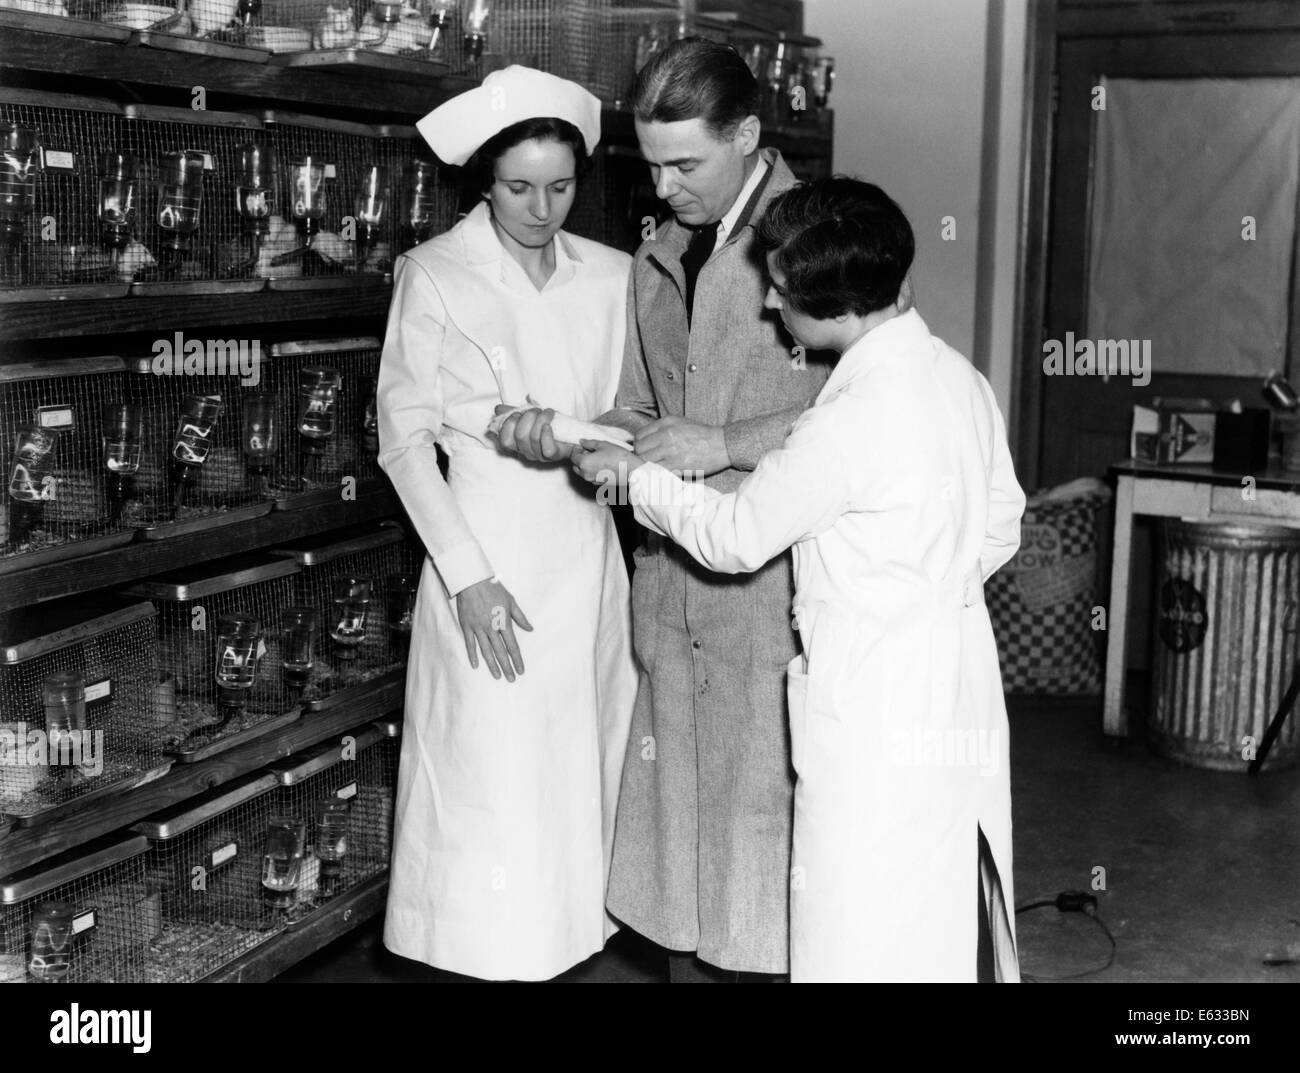 1930s TWO NURSES AND LAB TECHNICIAN MAN WOMEN IN HOSPITAL LABORATORY REVIEWING NOTES Stock Photo